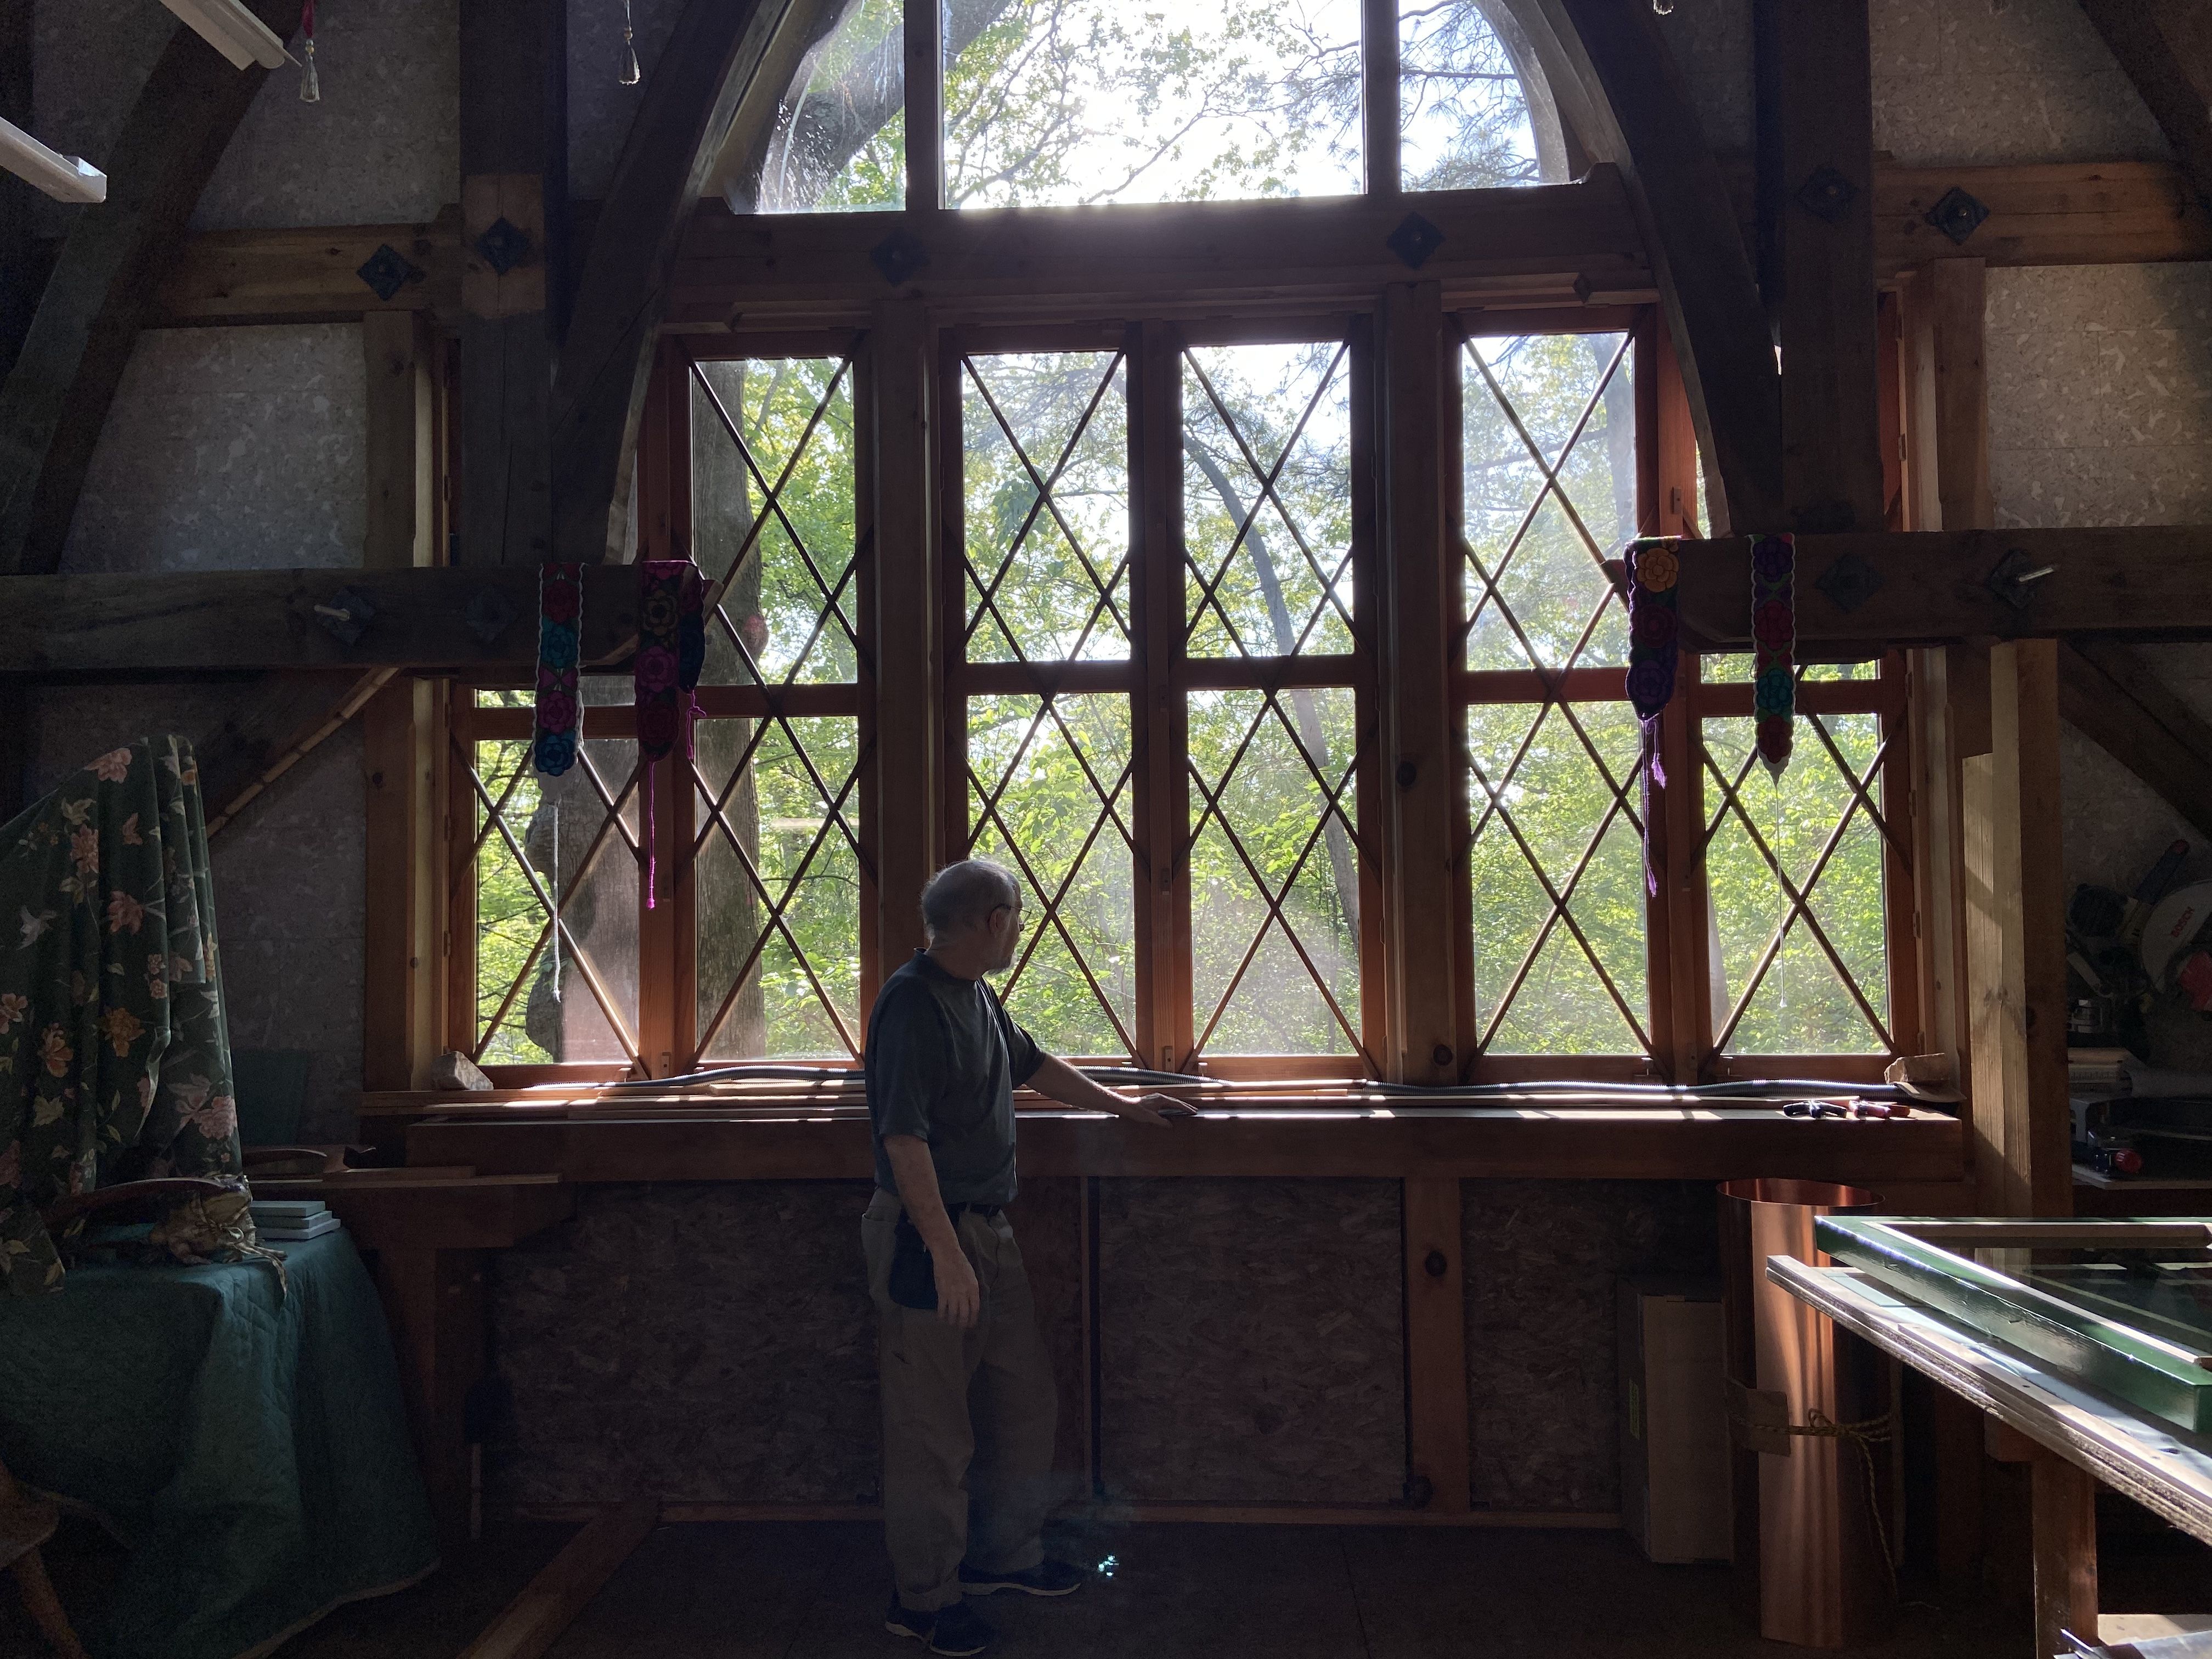 A man looks outside a large intricate window